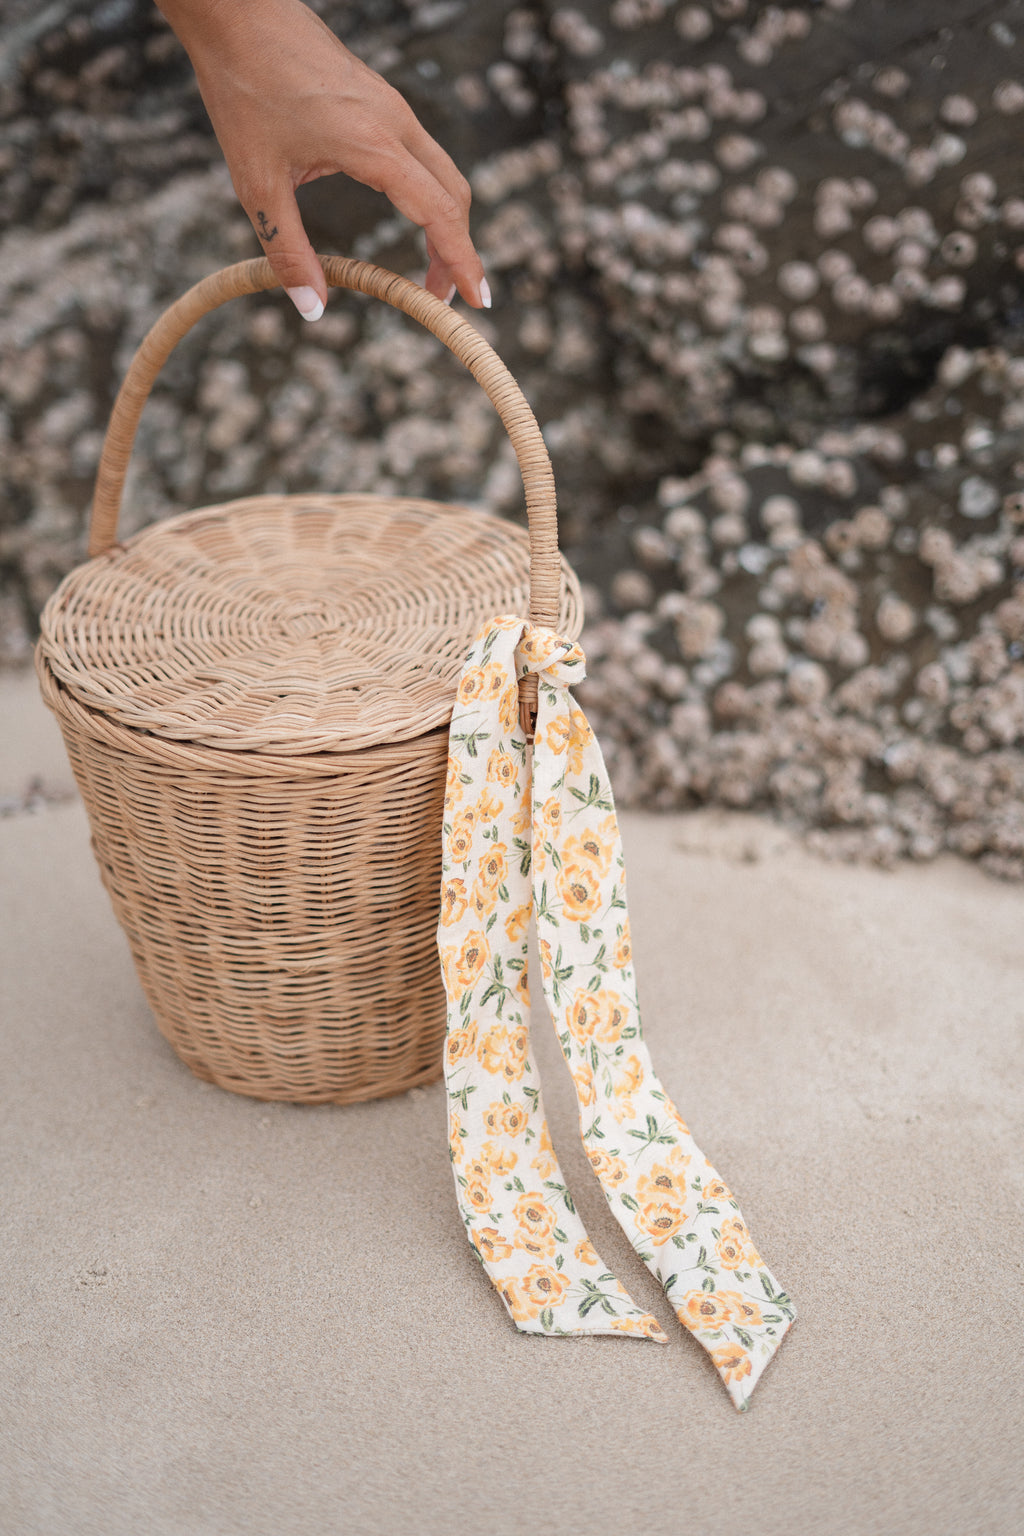 woven round picnic basket with a floral material ribbon tied to its handle